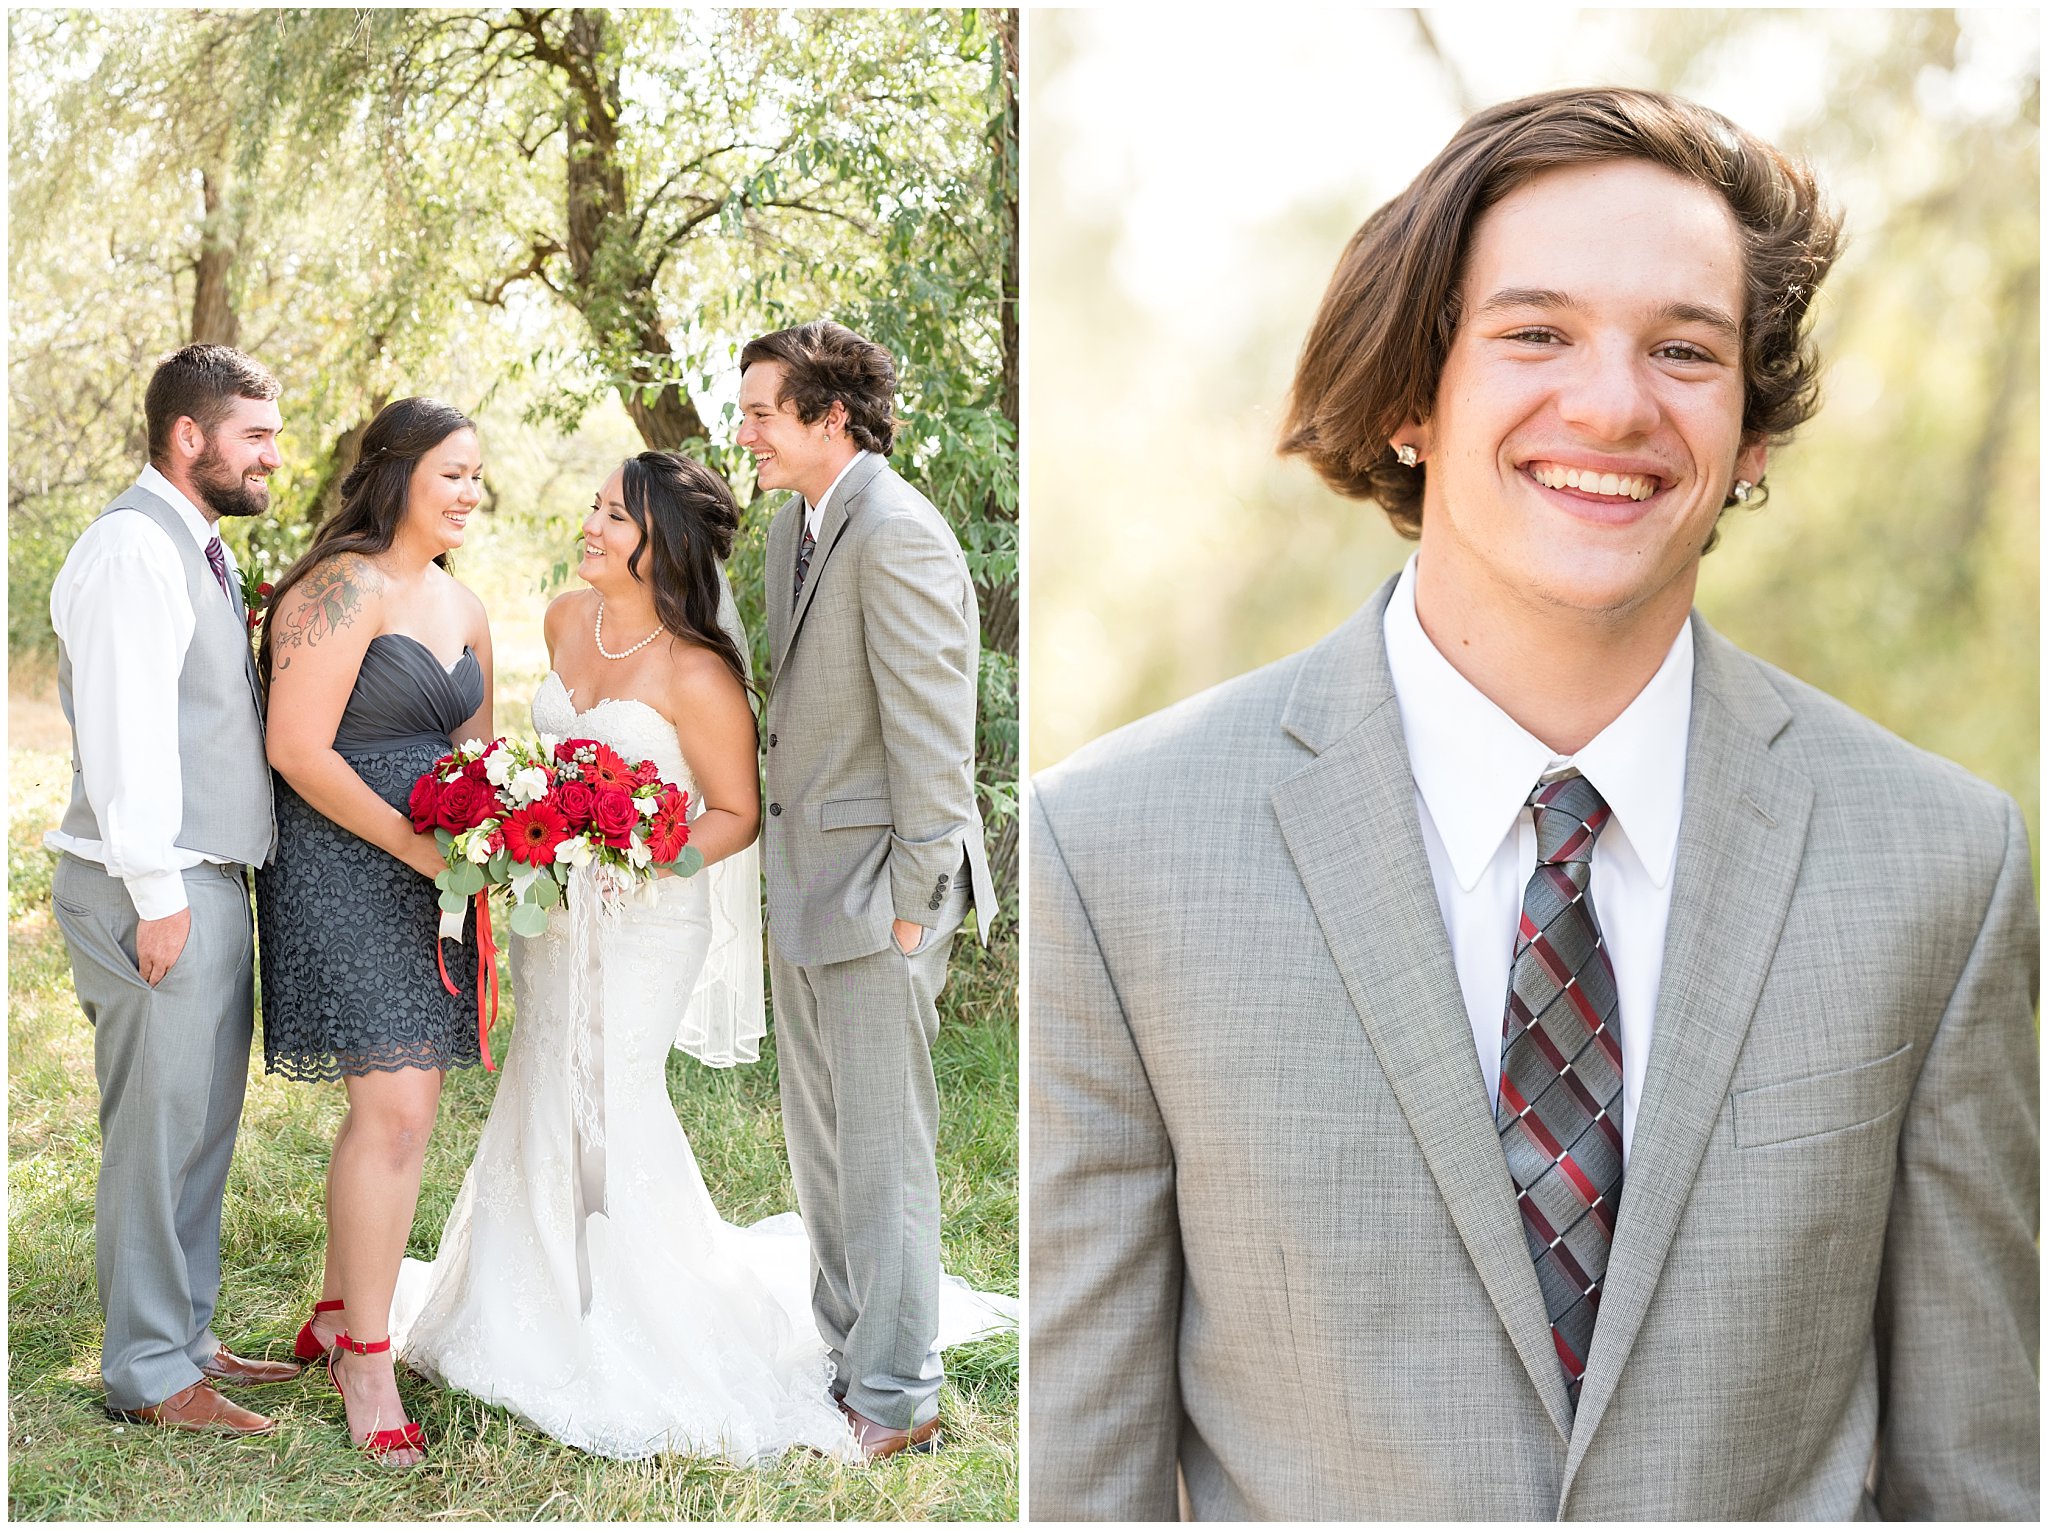 Siblings of the bride and the bride laughing candidly | Red and Grey wedding | Davis County Outdoor Wedding | Jessie and Dallin Photography